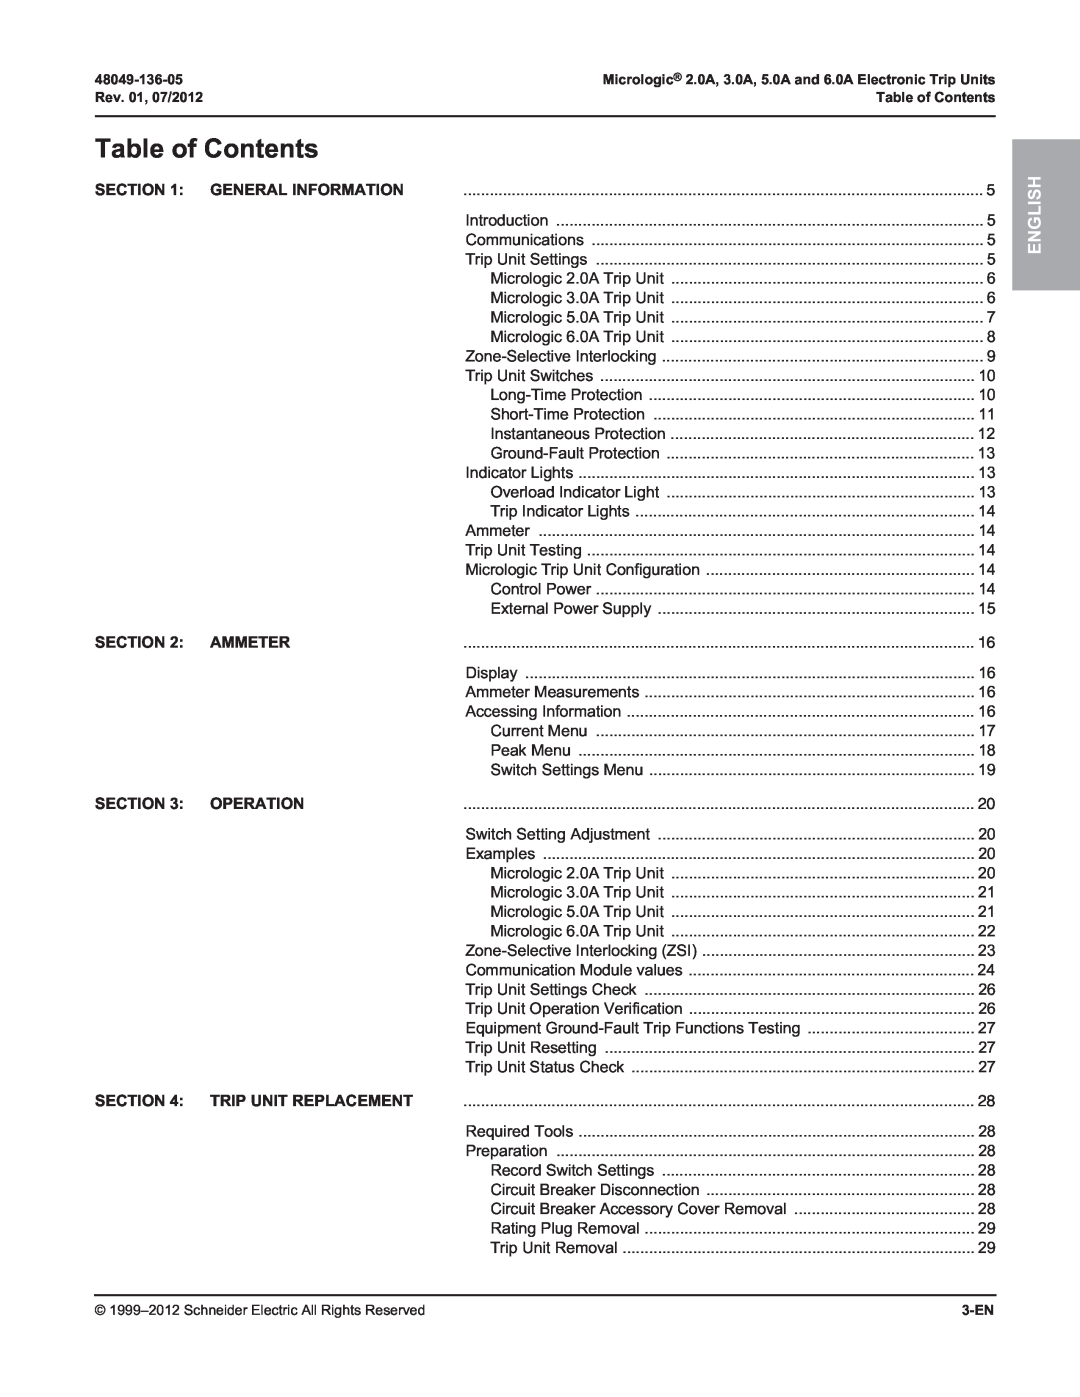 Schneider Electric 2.0A, 3.0A Table of Contents, Section, General Information, Ammeter, Operation, Trip Unit Replacement 